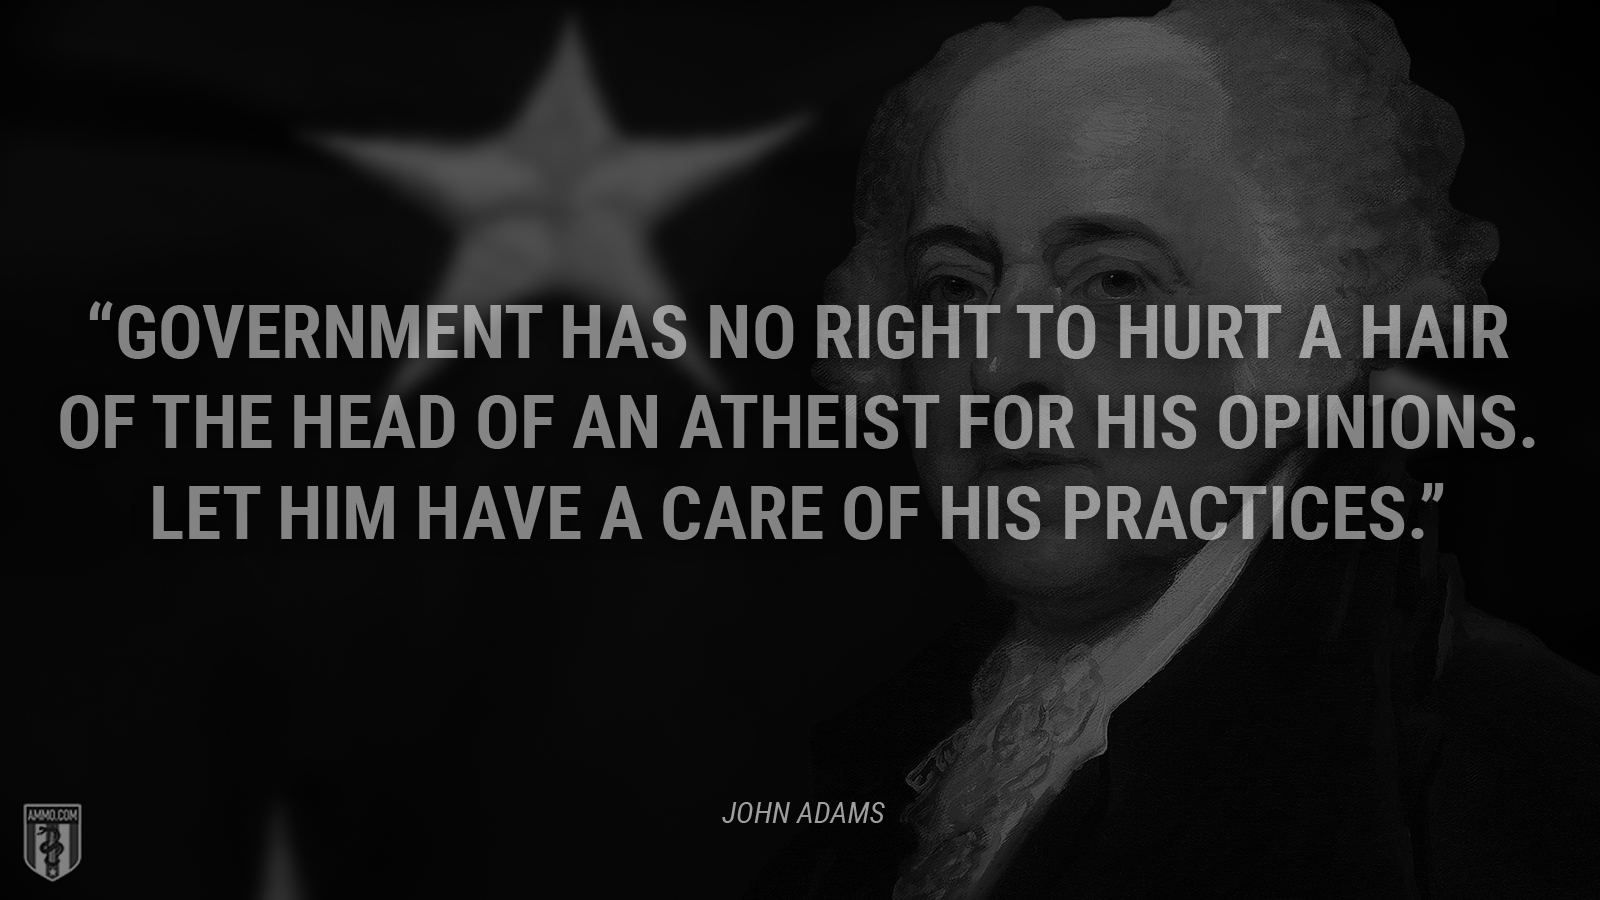 “Government has no Right to hurt a hair of the head of an Atheist for his Opinions. Let him have a care of his Practices.” - John Adams